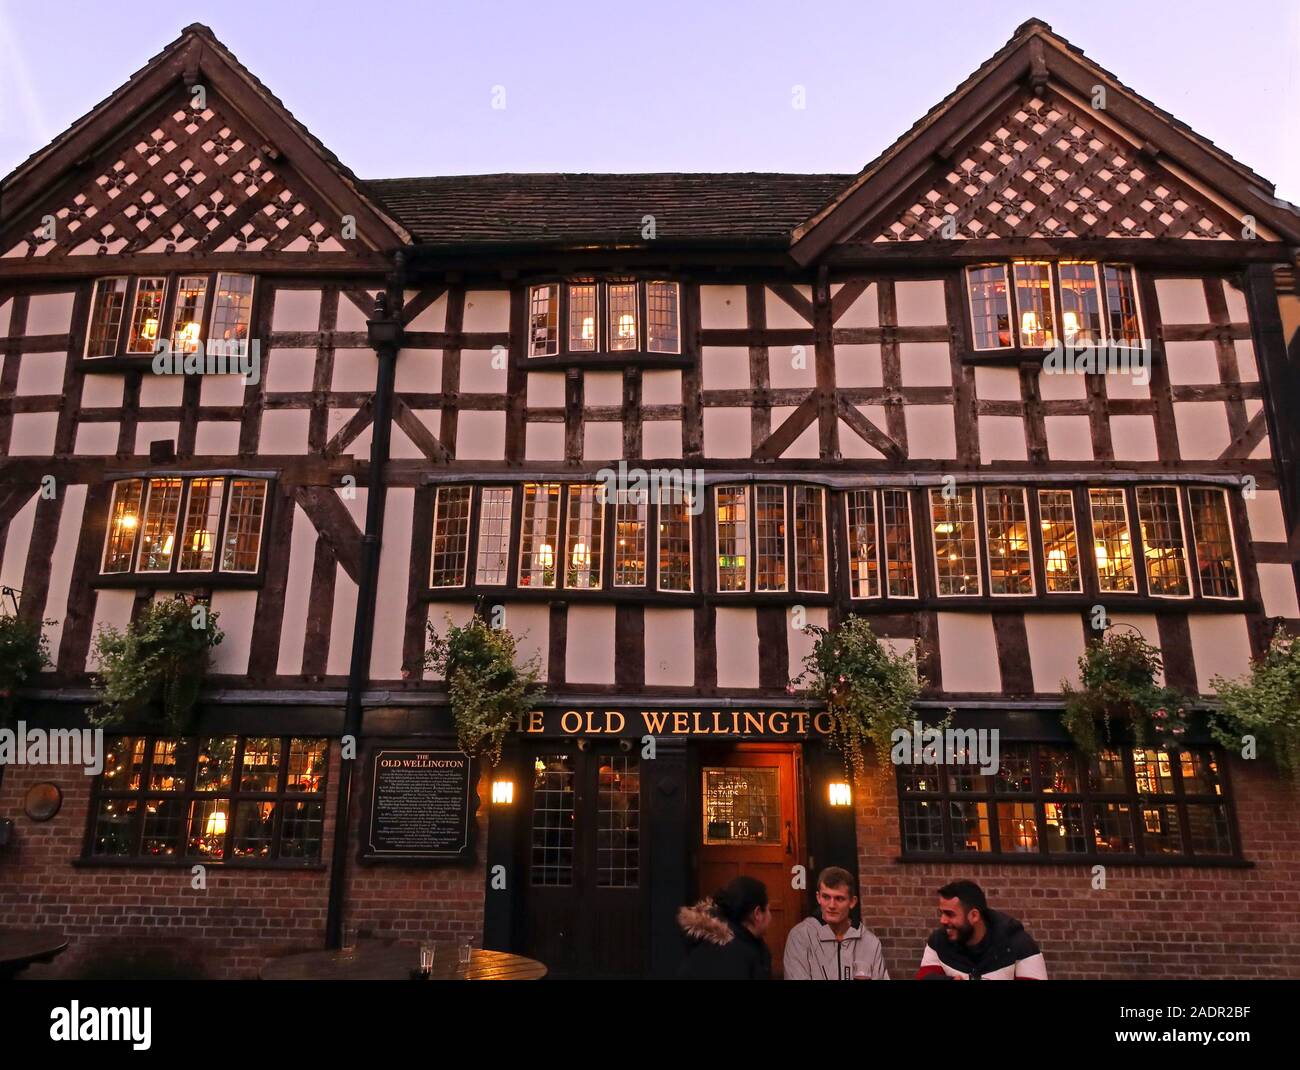 The Old Wellington,half timbered,pub from 1552,scheduled ancient monument,4 Cathedral Gates, Manchester. At dusk, winter time. Stock Photo